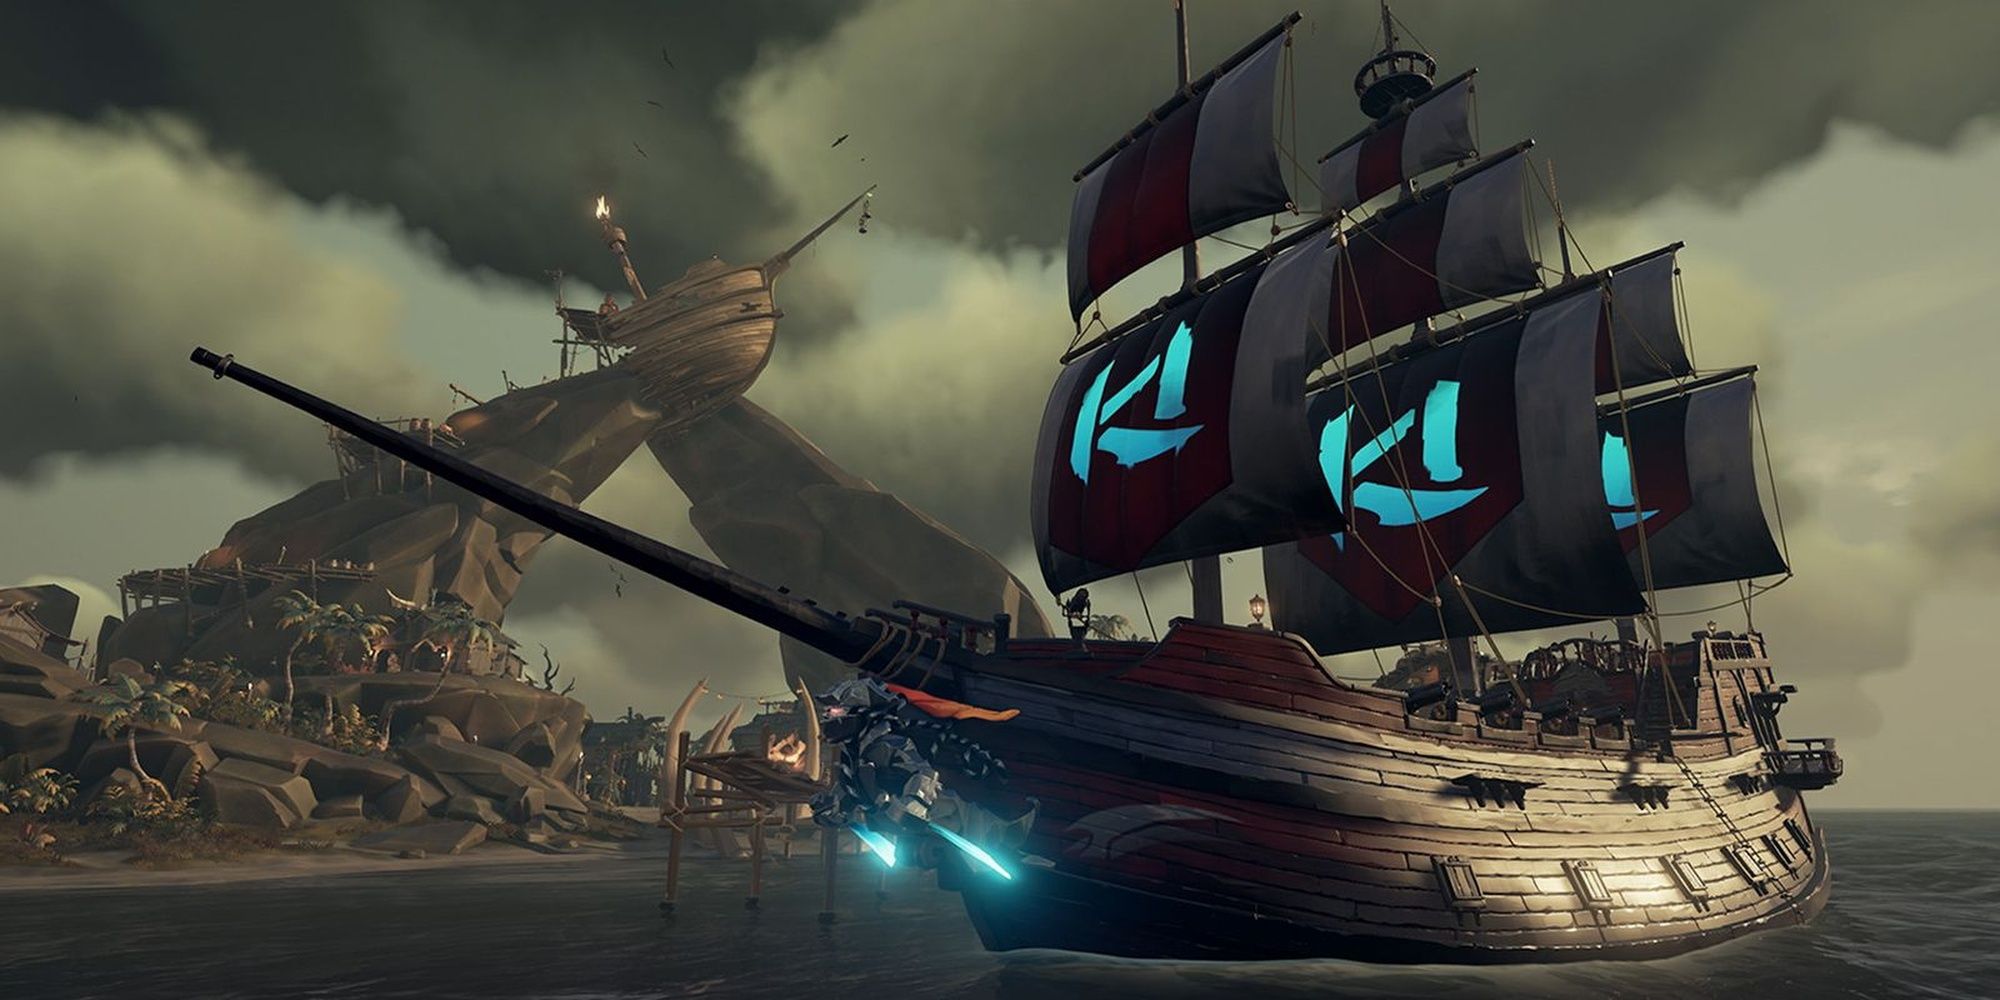 Sea Of Thieves: A Galleon With Killer Instinct Themed Sales